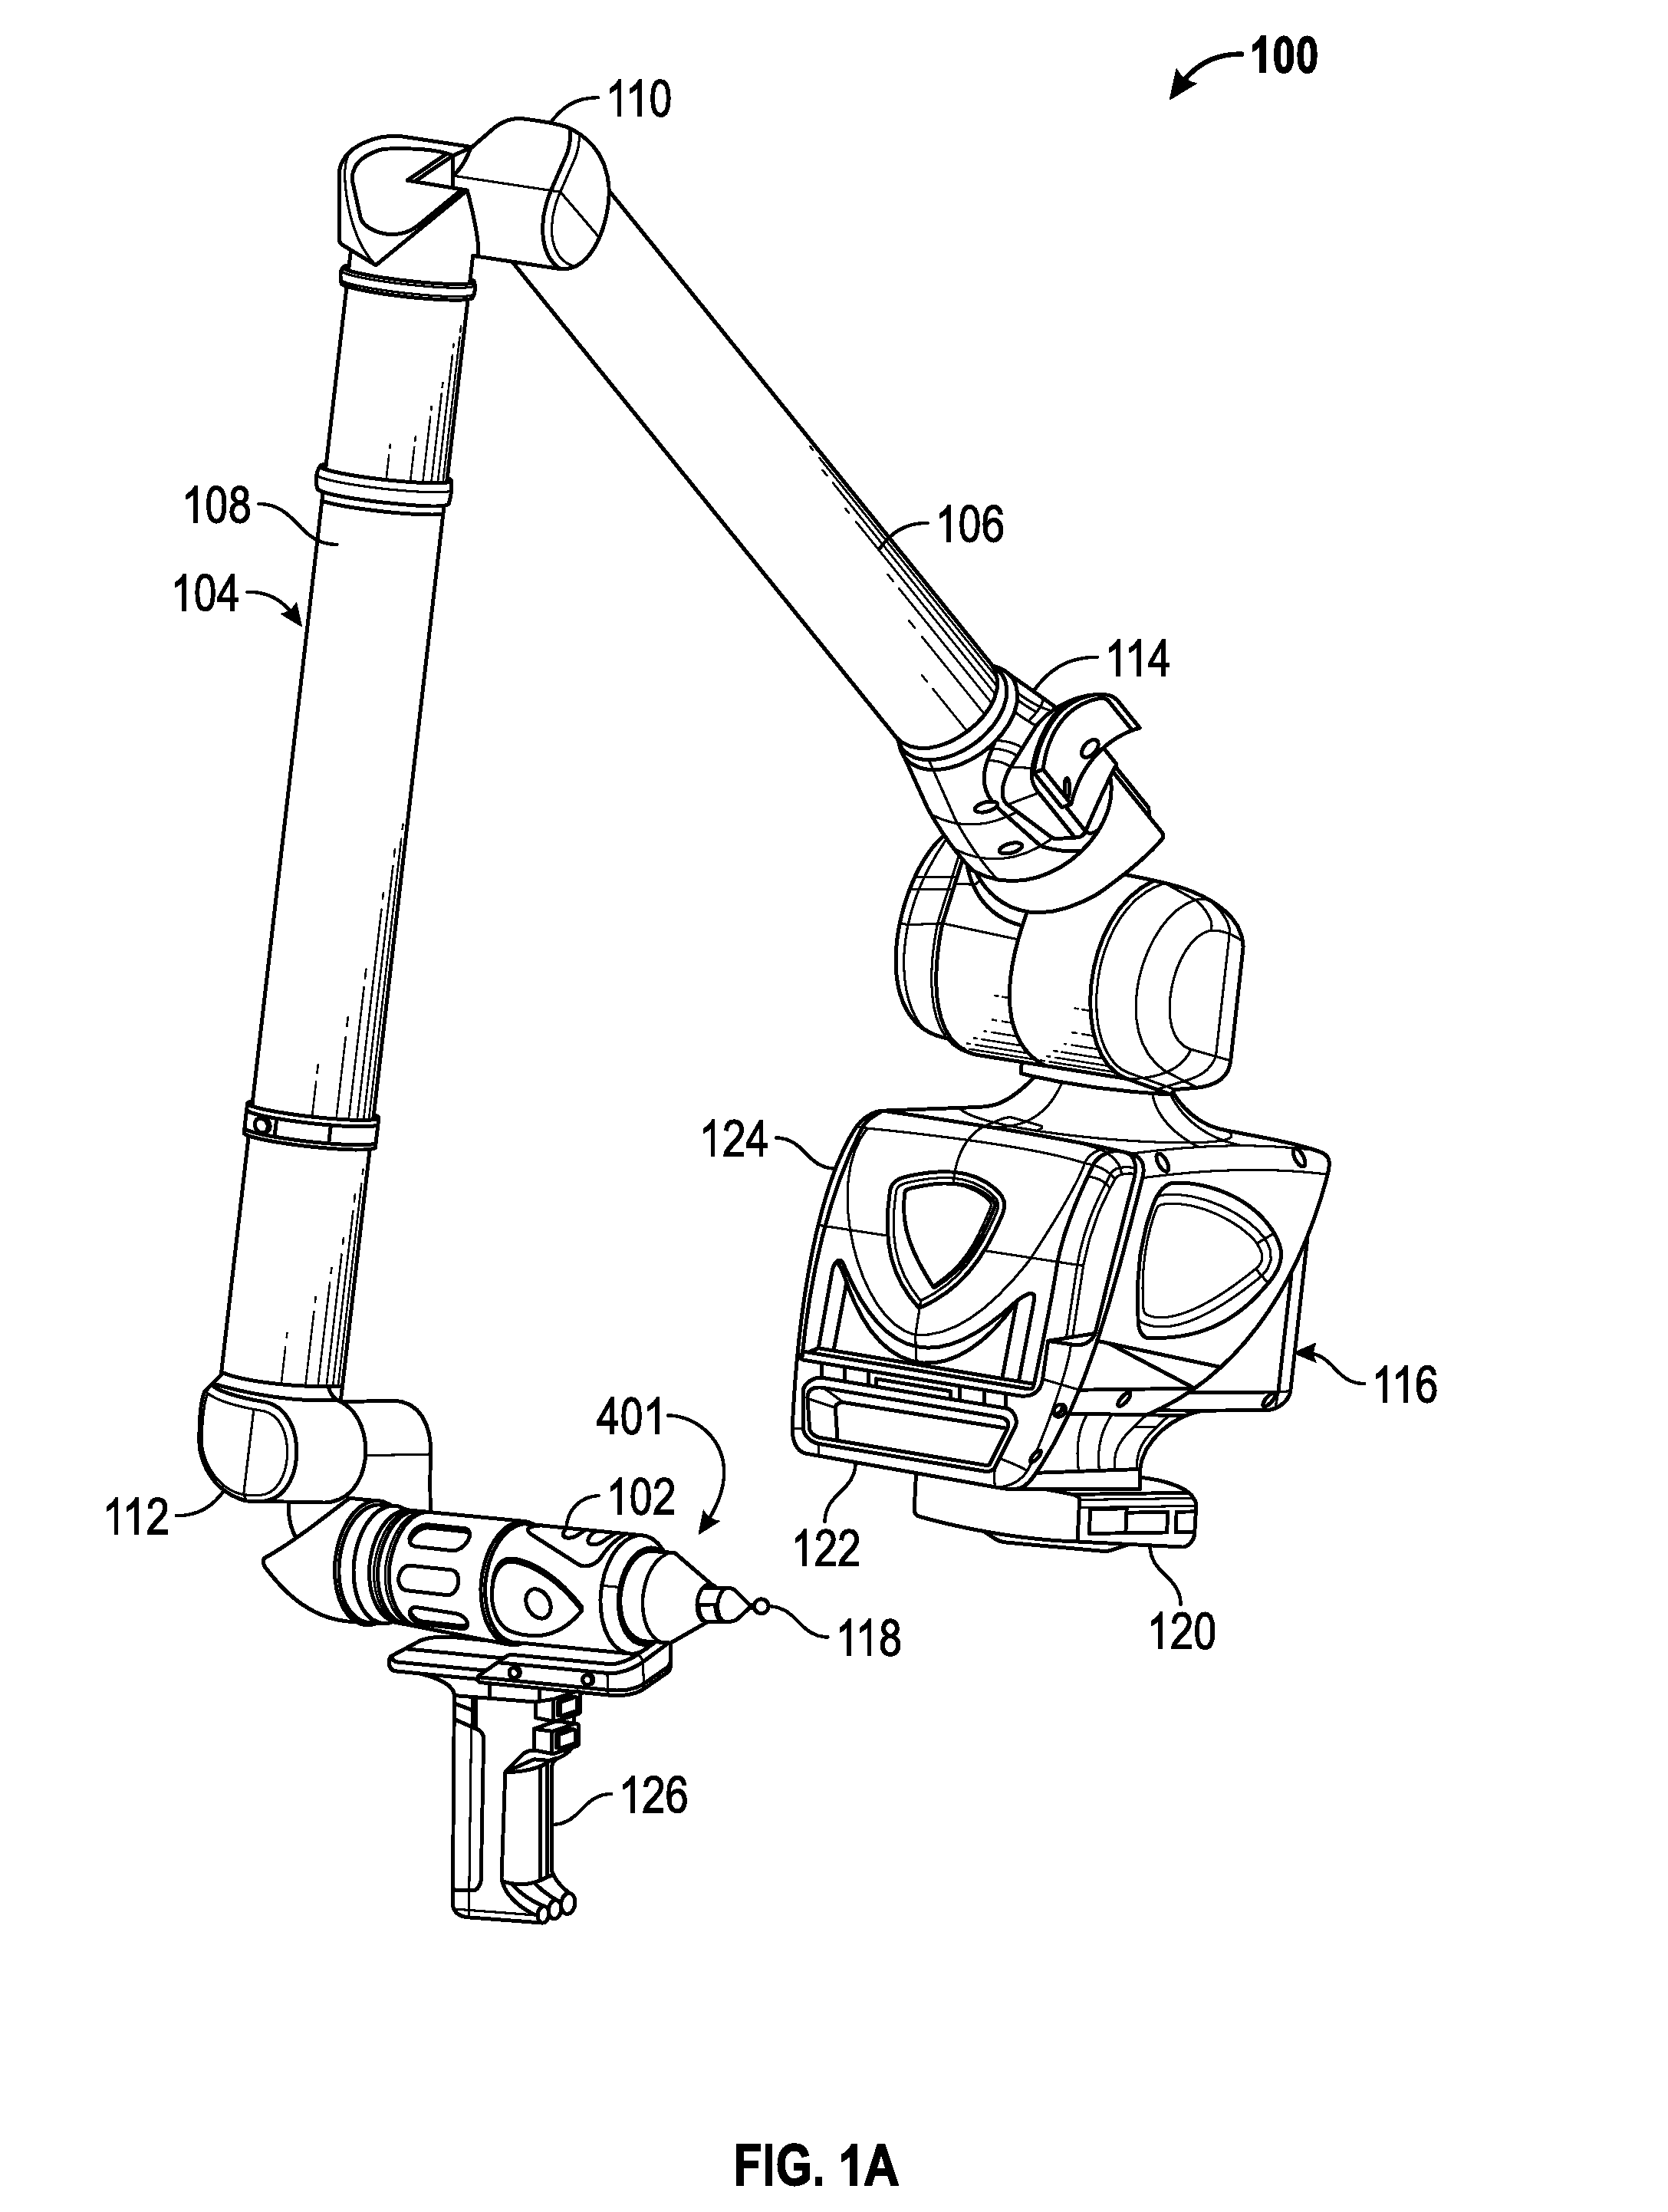 Articulated arm coordinate measurement machine having a 2d camera and method of obtaining 3D representations